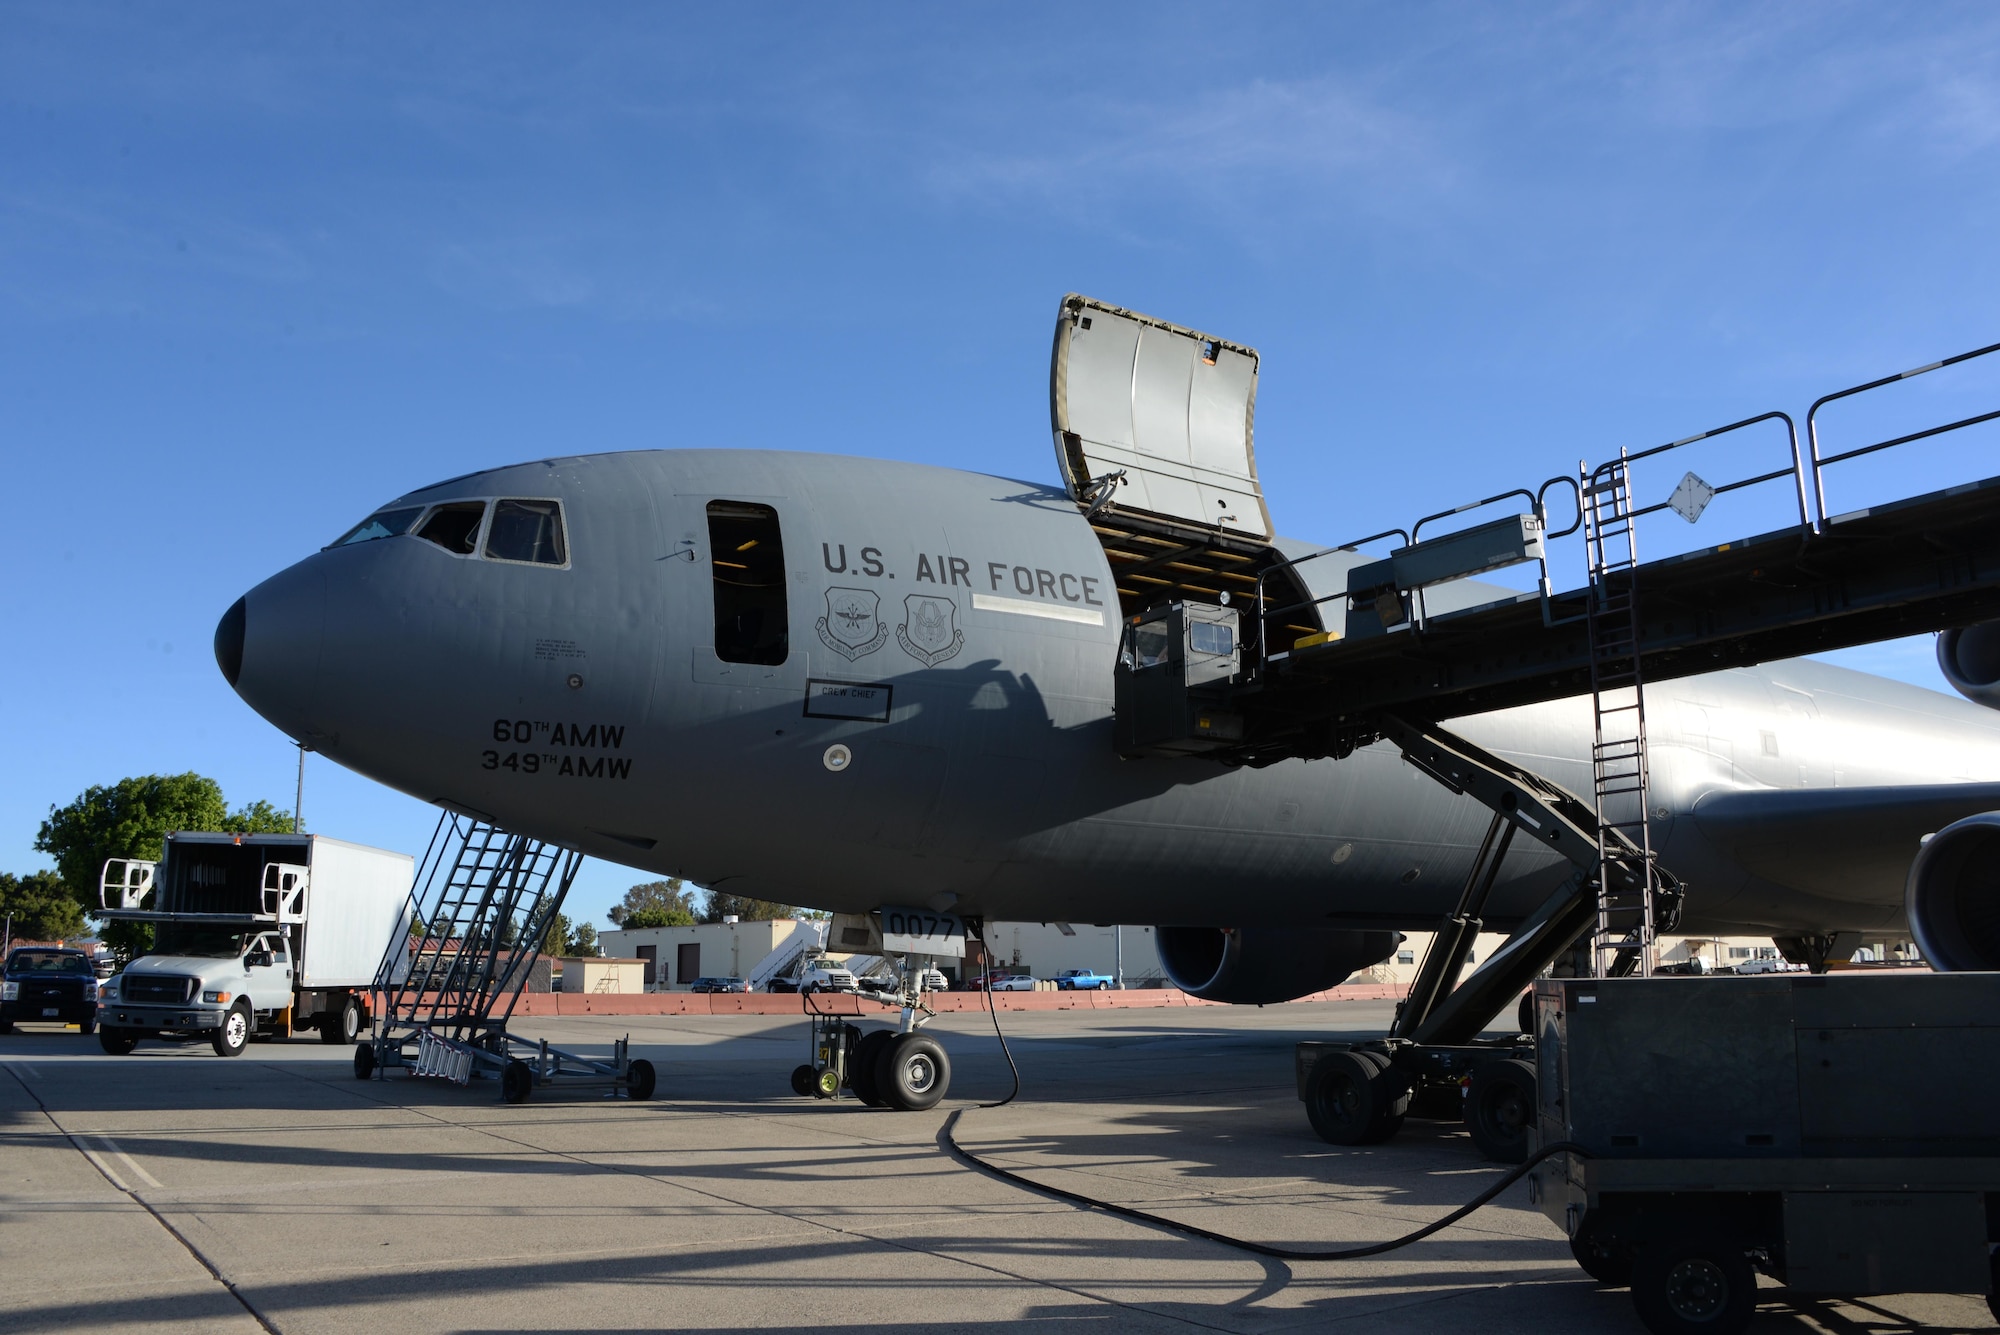 A KC-10 Extender is loaded with 15,000 pounds of cargo at Travis Air Force Base, Calif., June 17, 2017, prior to a flight to Joint Base Pearl Harbor-Hickam, Hawaii. The aircraft is capable of transporting 170,000 pounds of cargo. (U.S. Air Force photo/Tech. Sgt. James Hodgman)